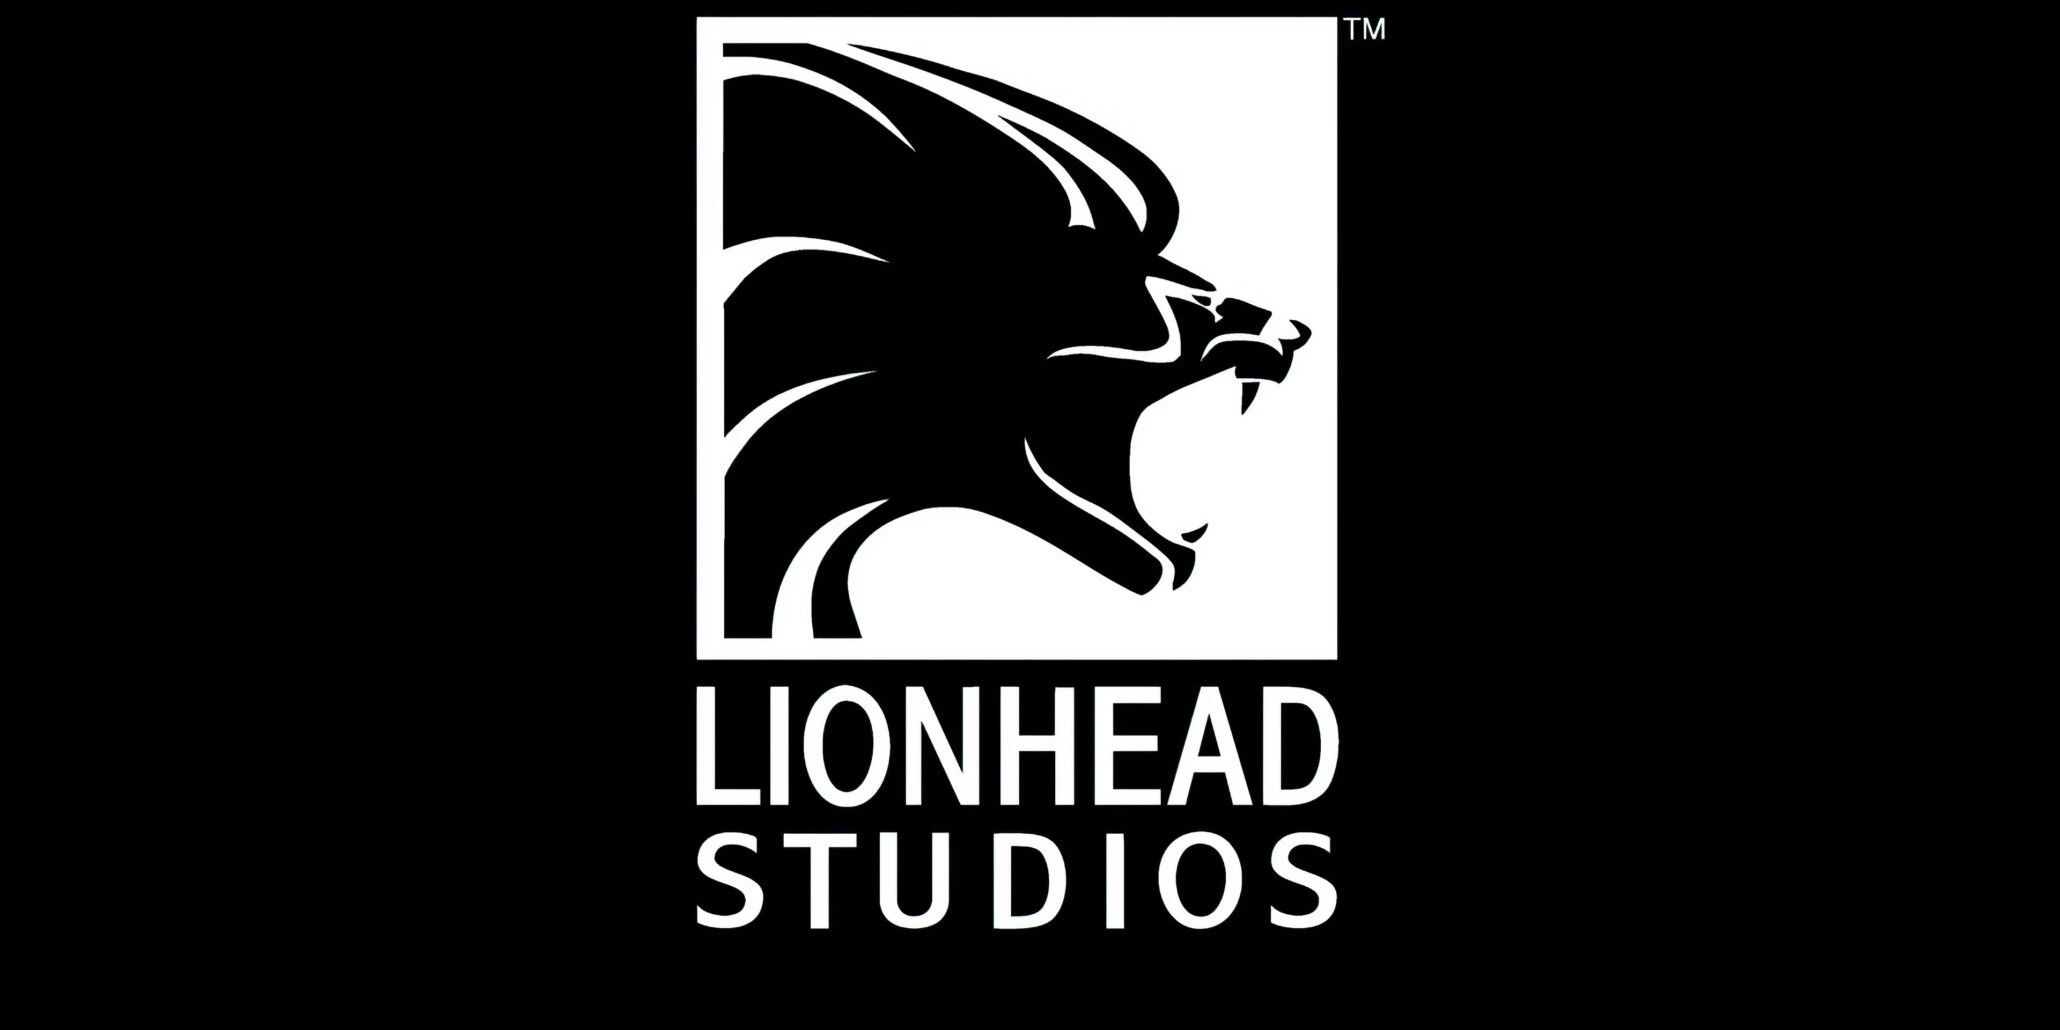 Fable Developer Lionhead Was Handled Poorly, Microsoft Admits